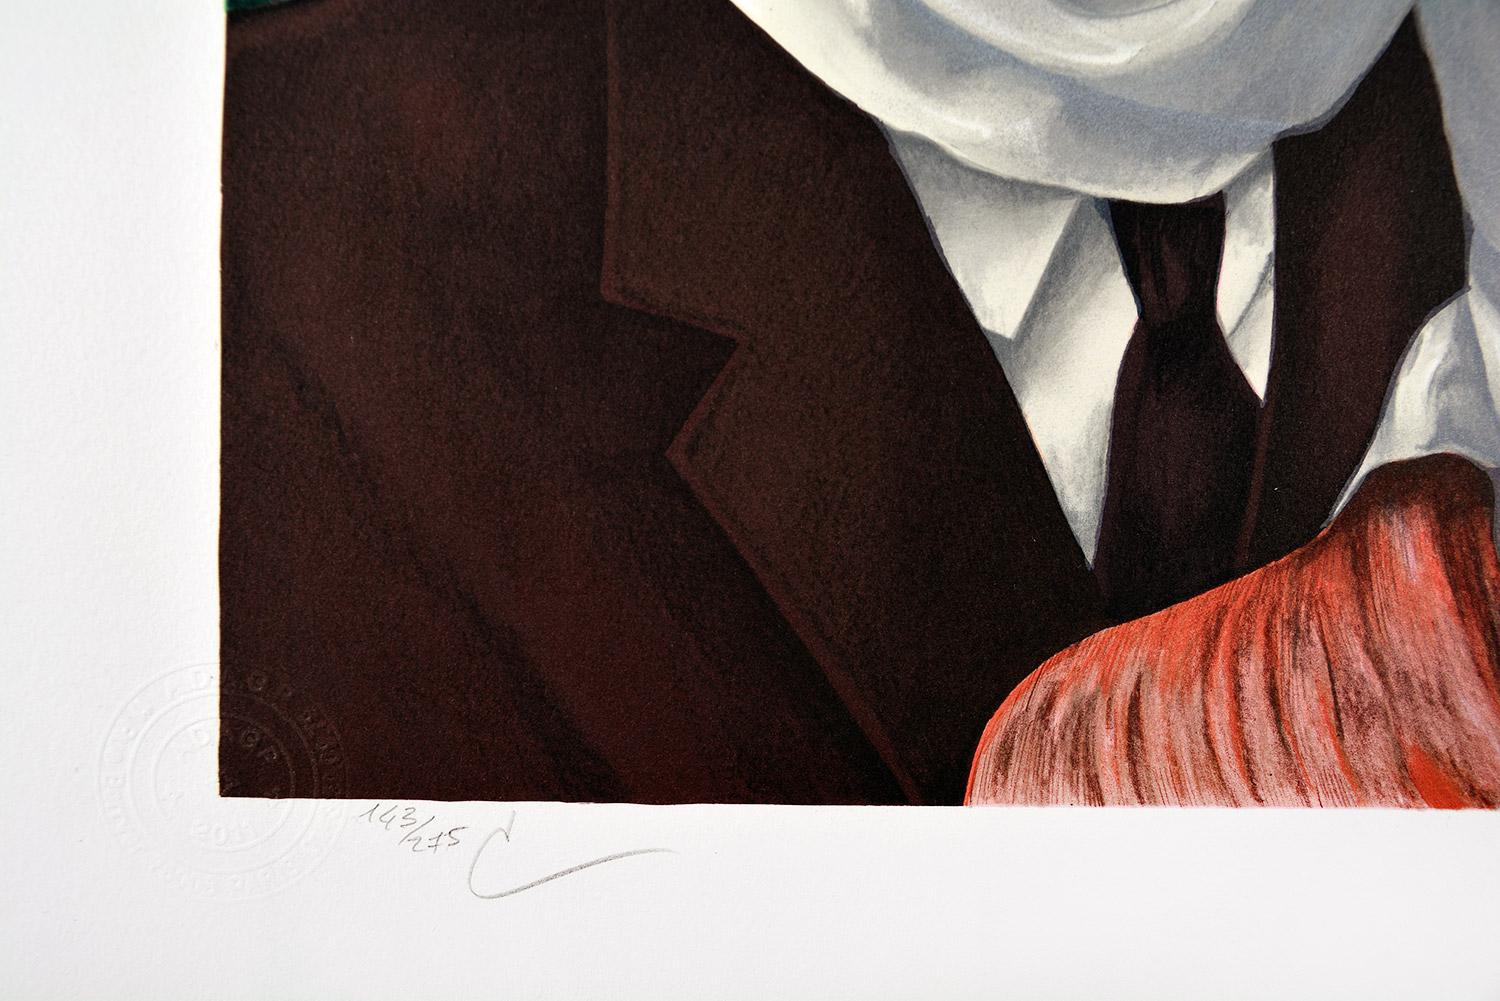 René Magritte - LES AMANTS, 1928 (THE LOVERS)
Date of creation: 2010
Medium: Lithograph on BFK Rives Paper
Edition number: 143/275
Size: 60 x 45 cm
Condition: New, in mint condition and never framed
Observations: Lithograph on BFK Rives paper plate